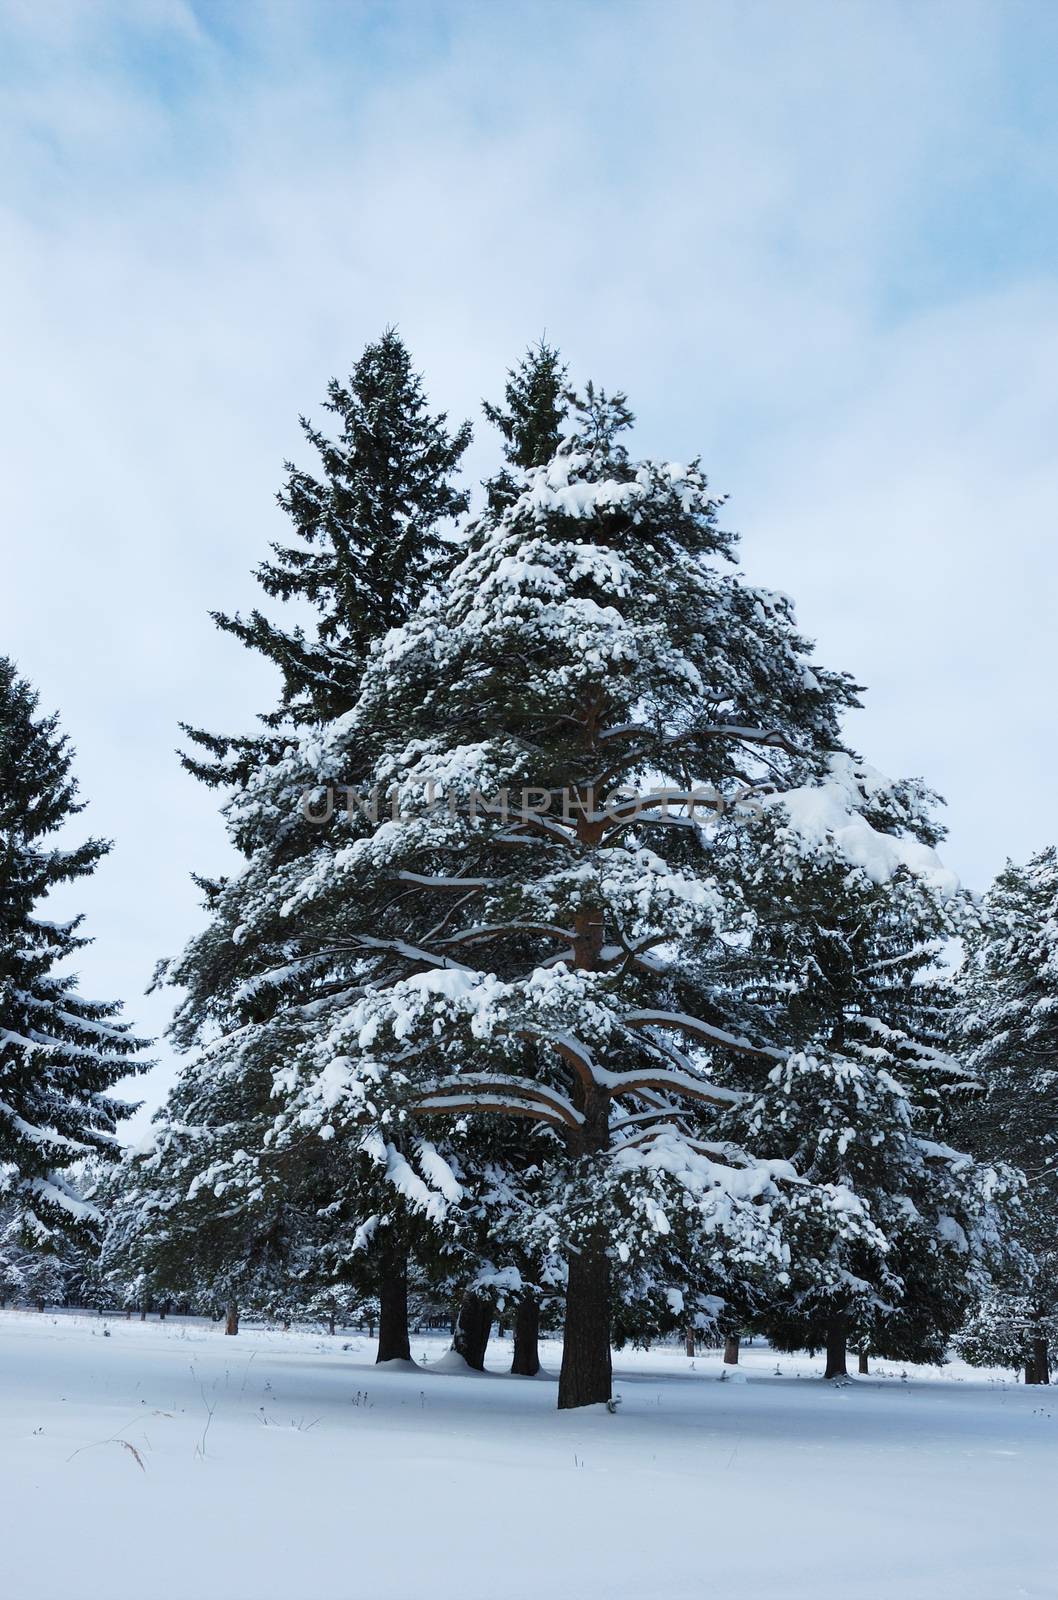 Snow covered pine trees in winter forest